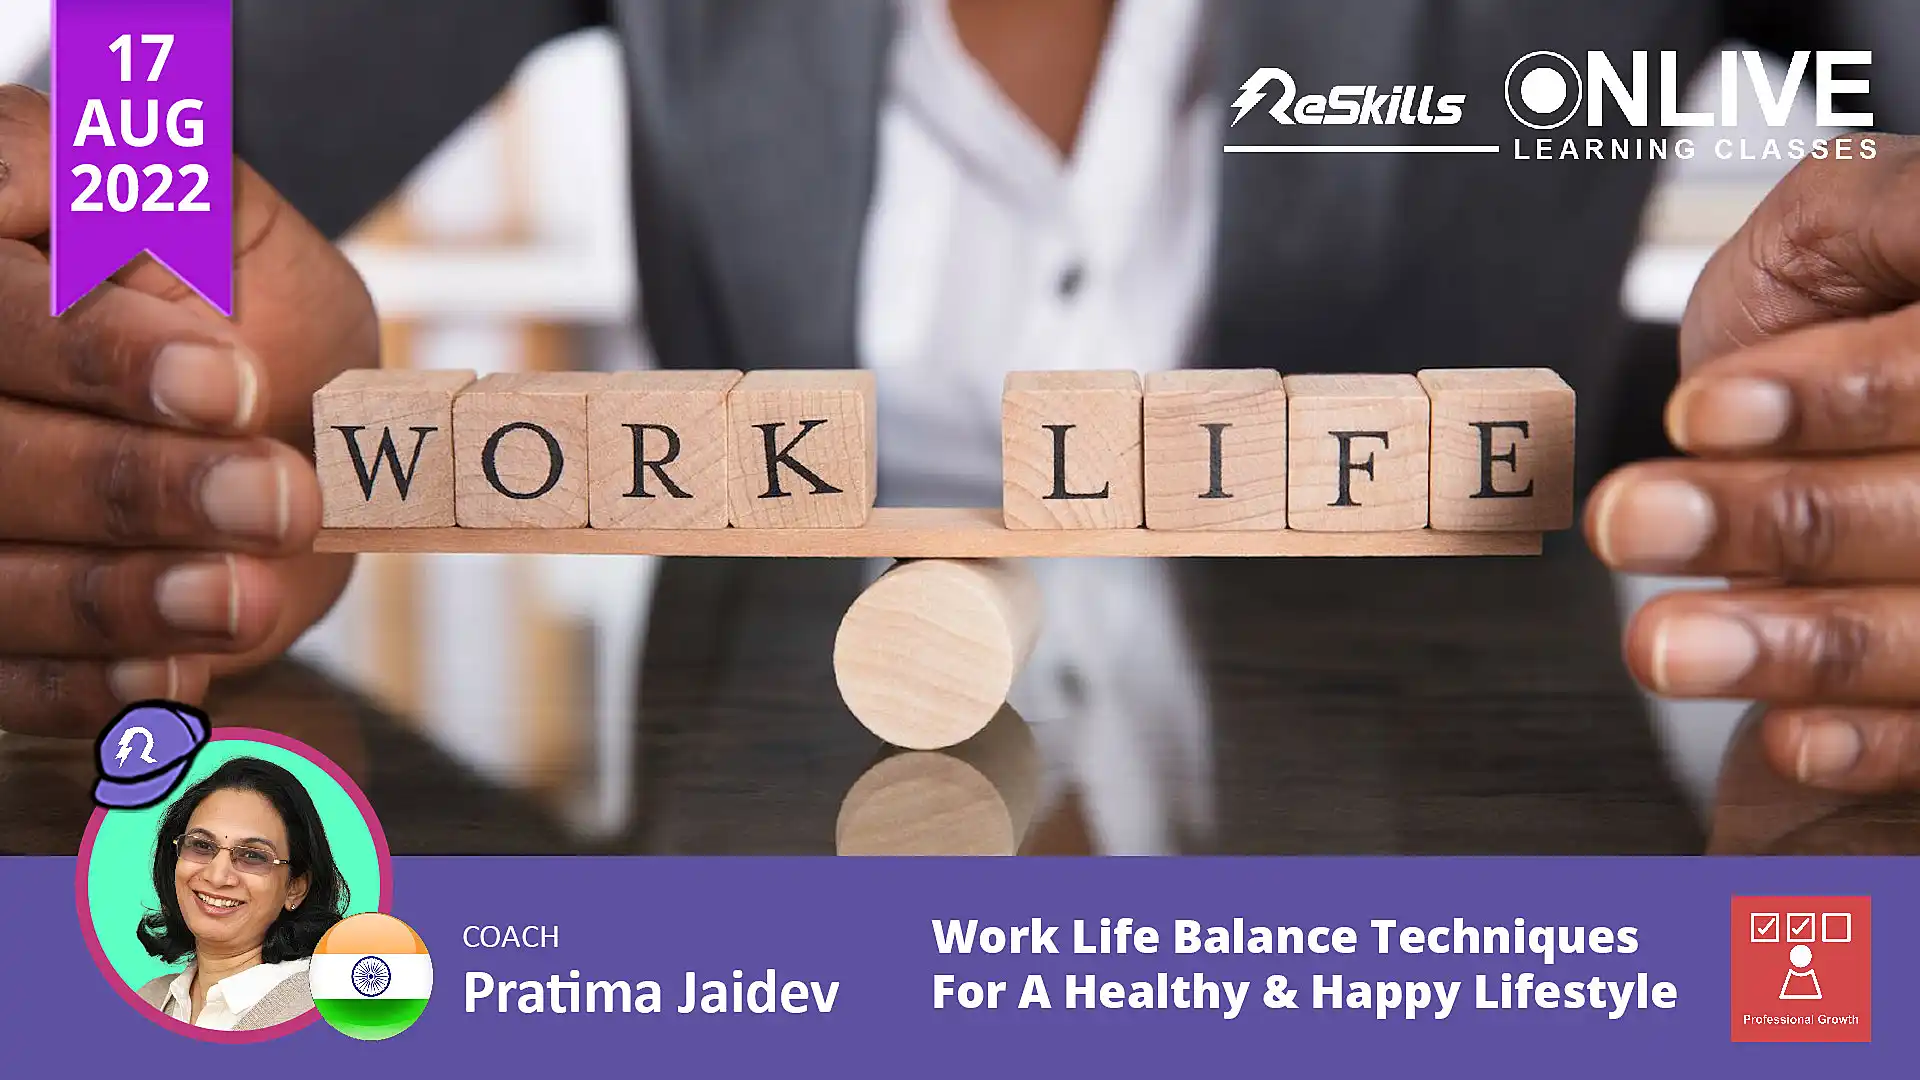 Work Life Balance Techniques For A Healthy & Happy Lifestyle - ReSkills